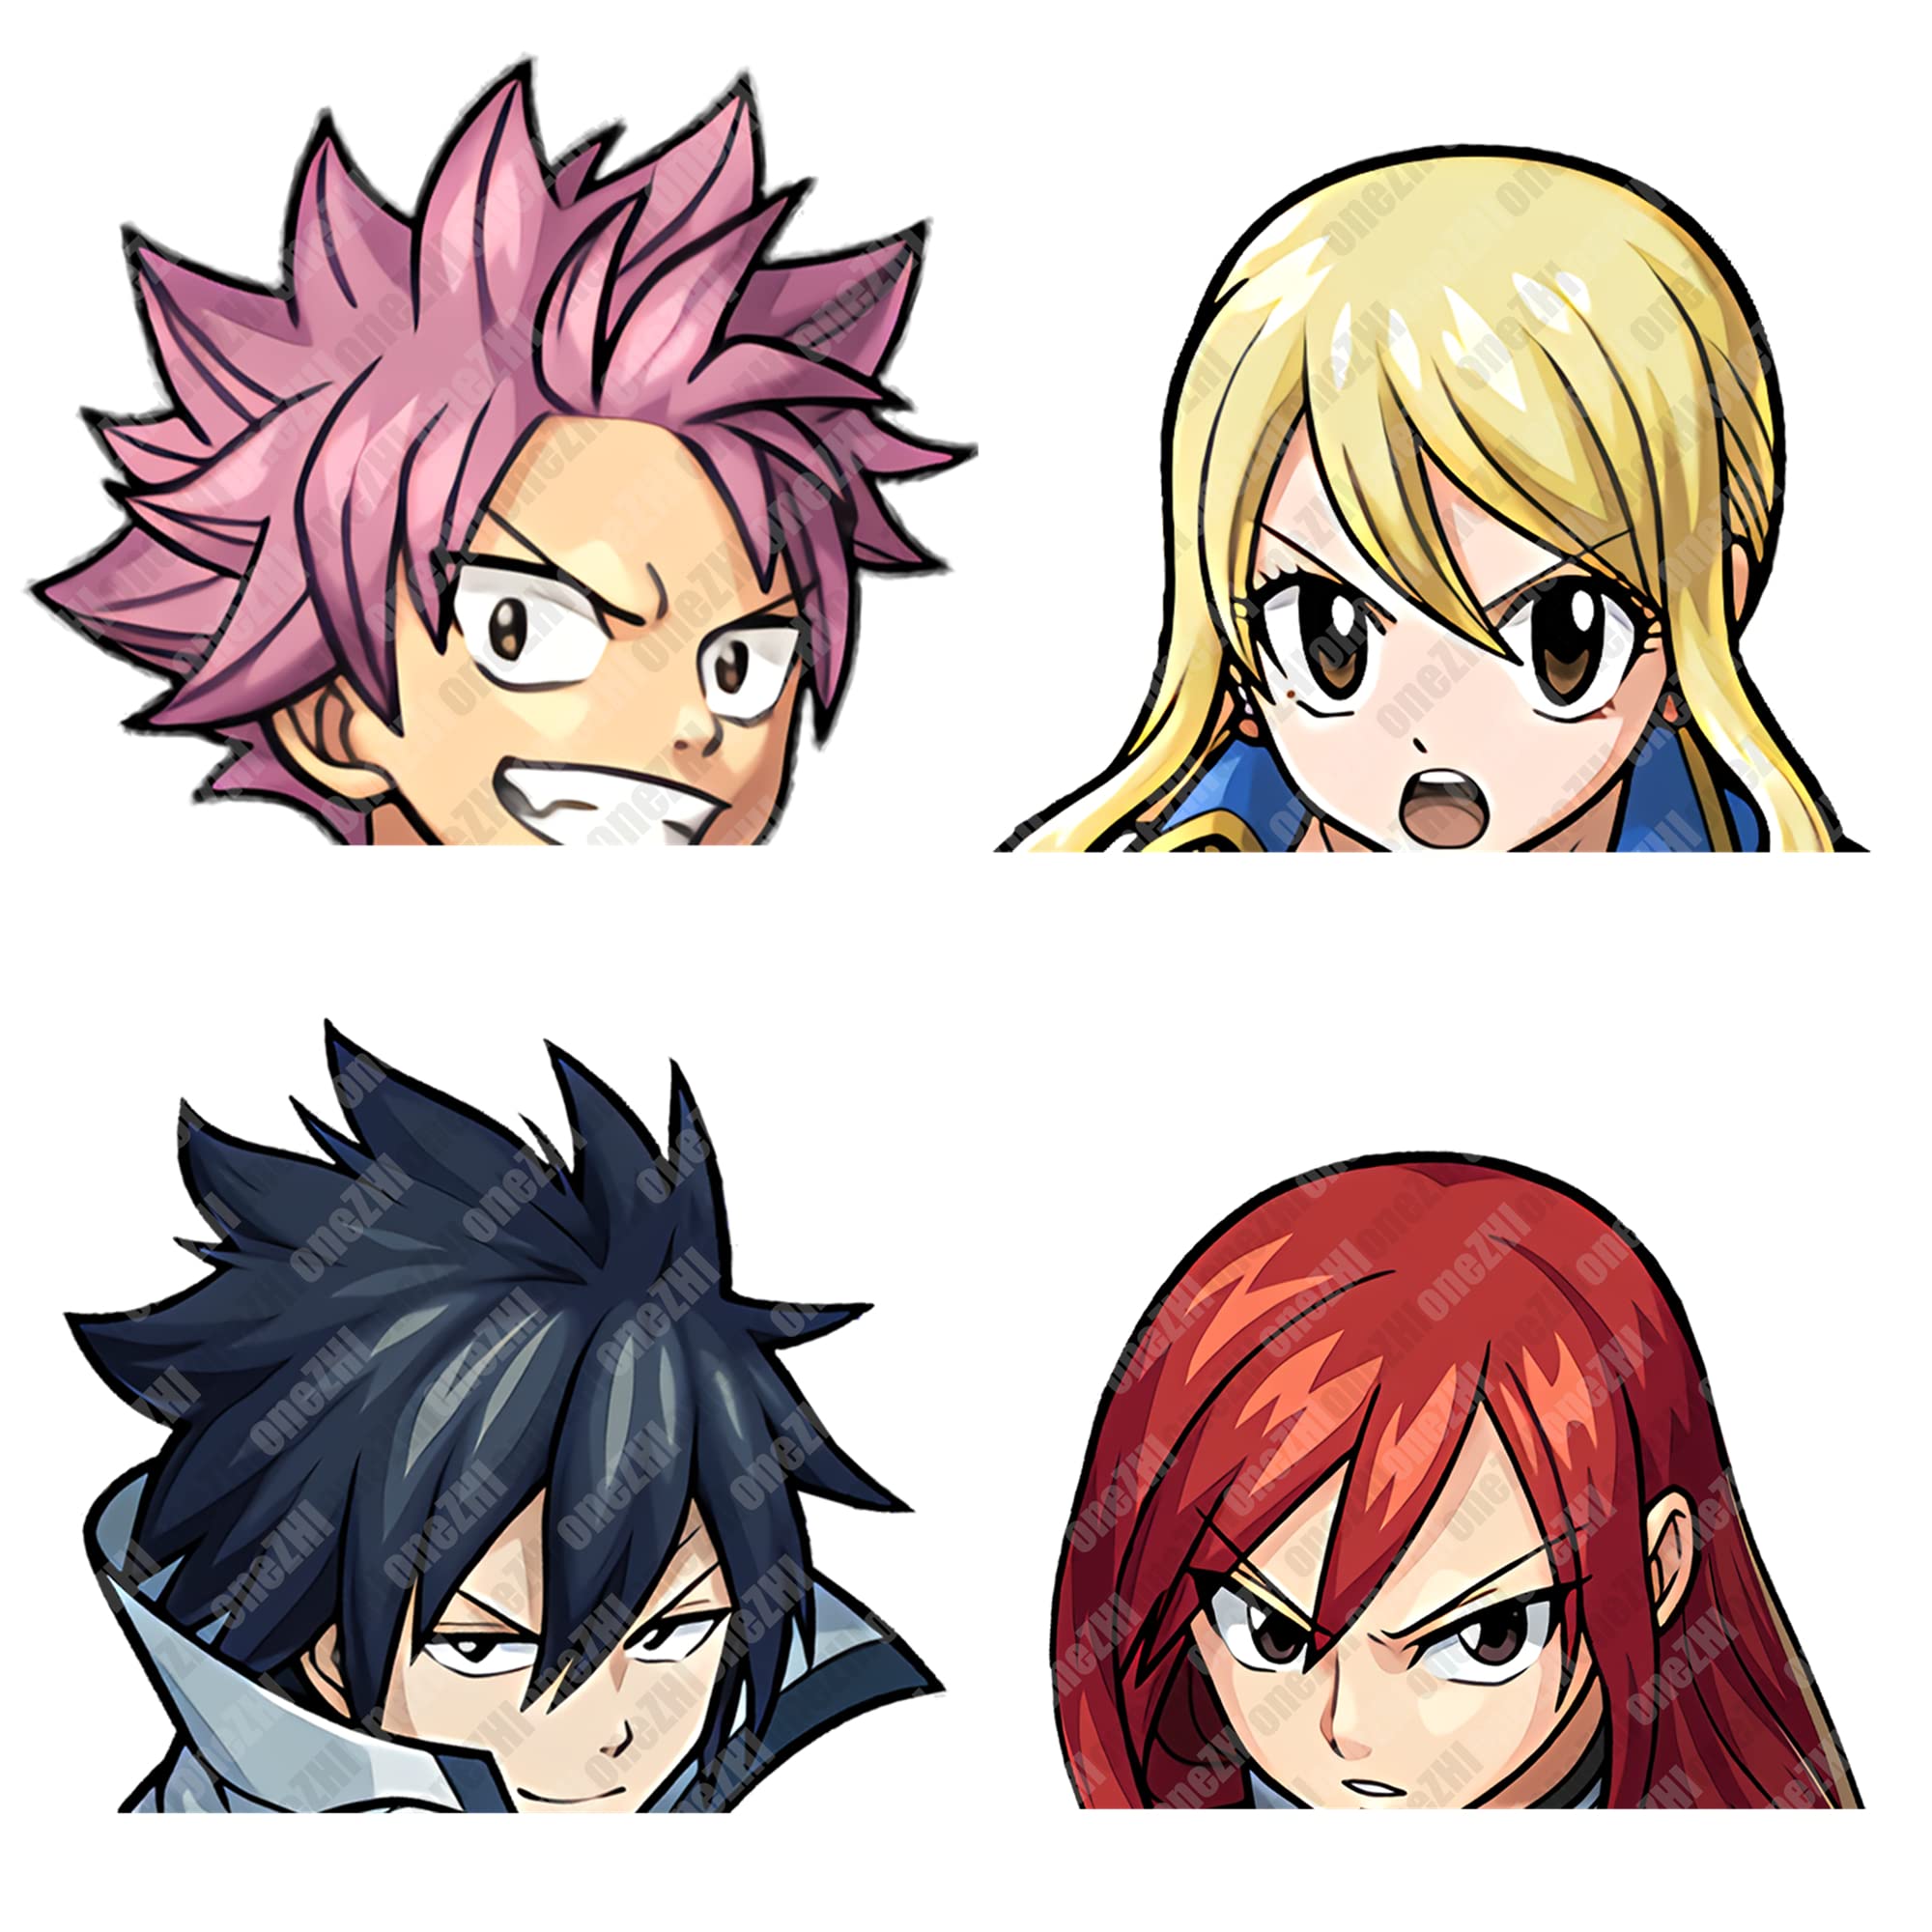 Side Anime/Manga Characters, Stickers - Creative and Unique Designs |  Jalapenos Decals